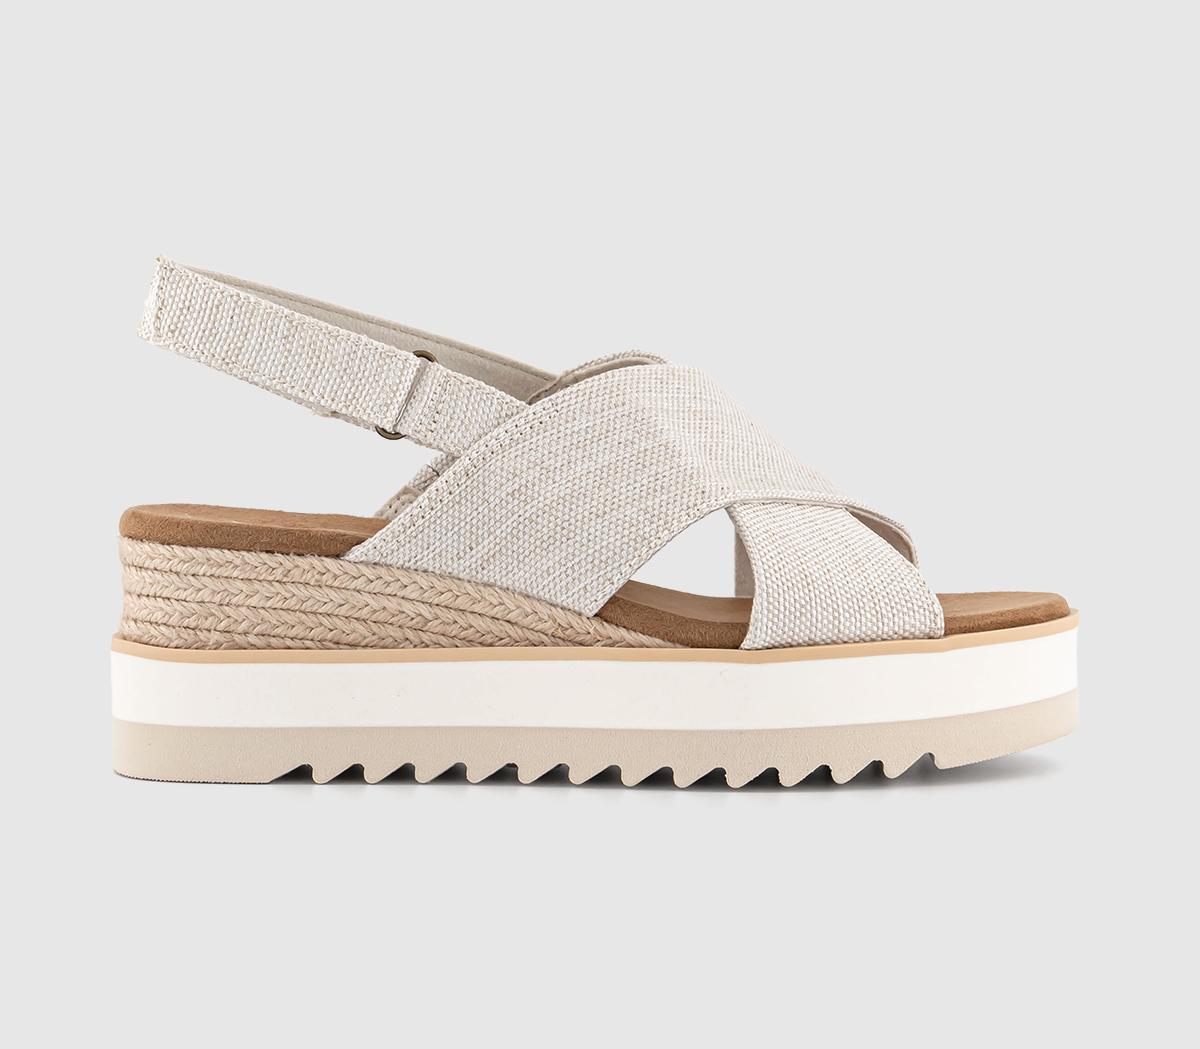 TOMSDiana Cross Strap SandalsNatural